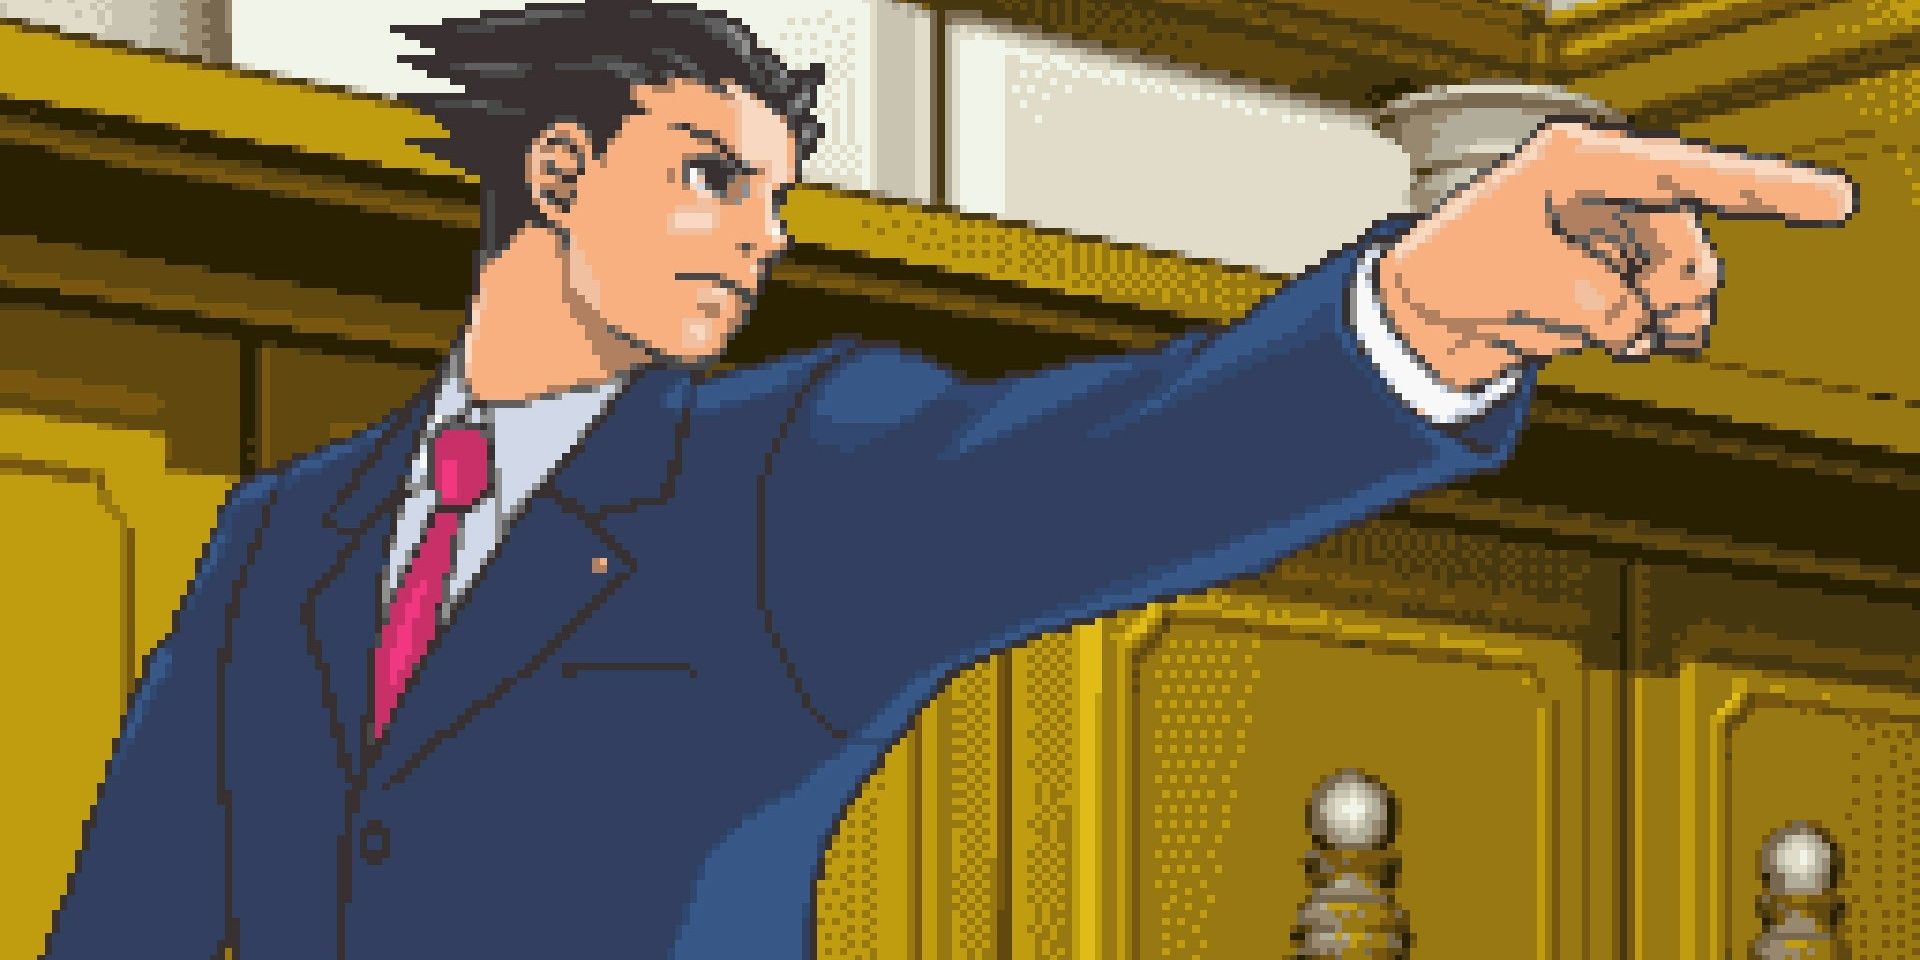 Phoenix Wright pointing in the court room in Ace Attorney